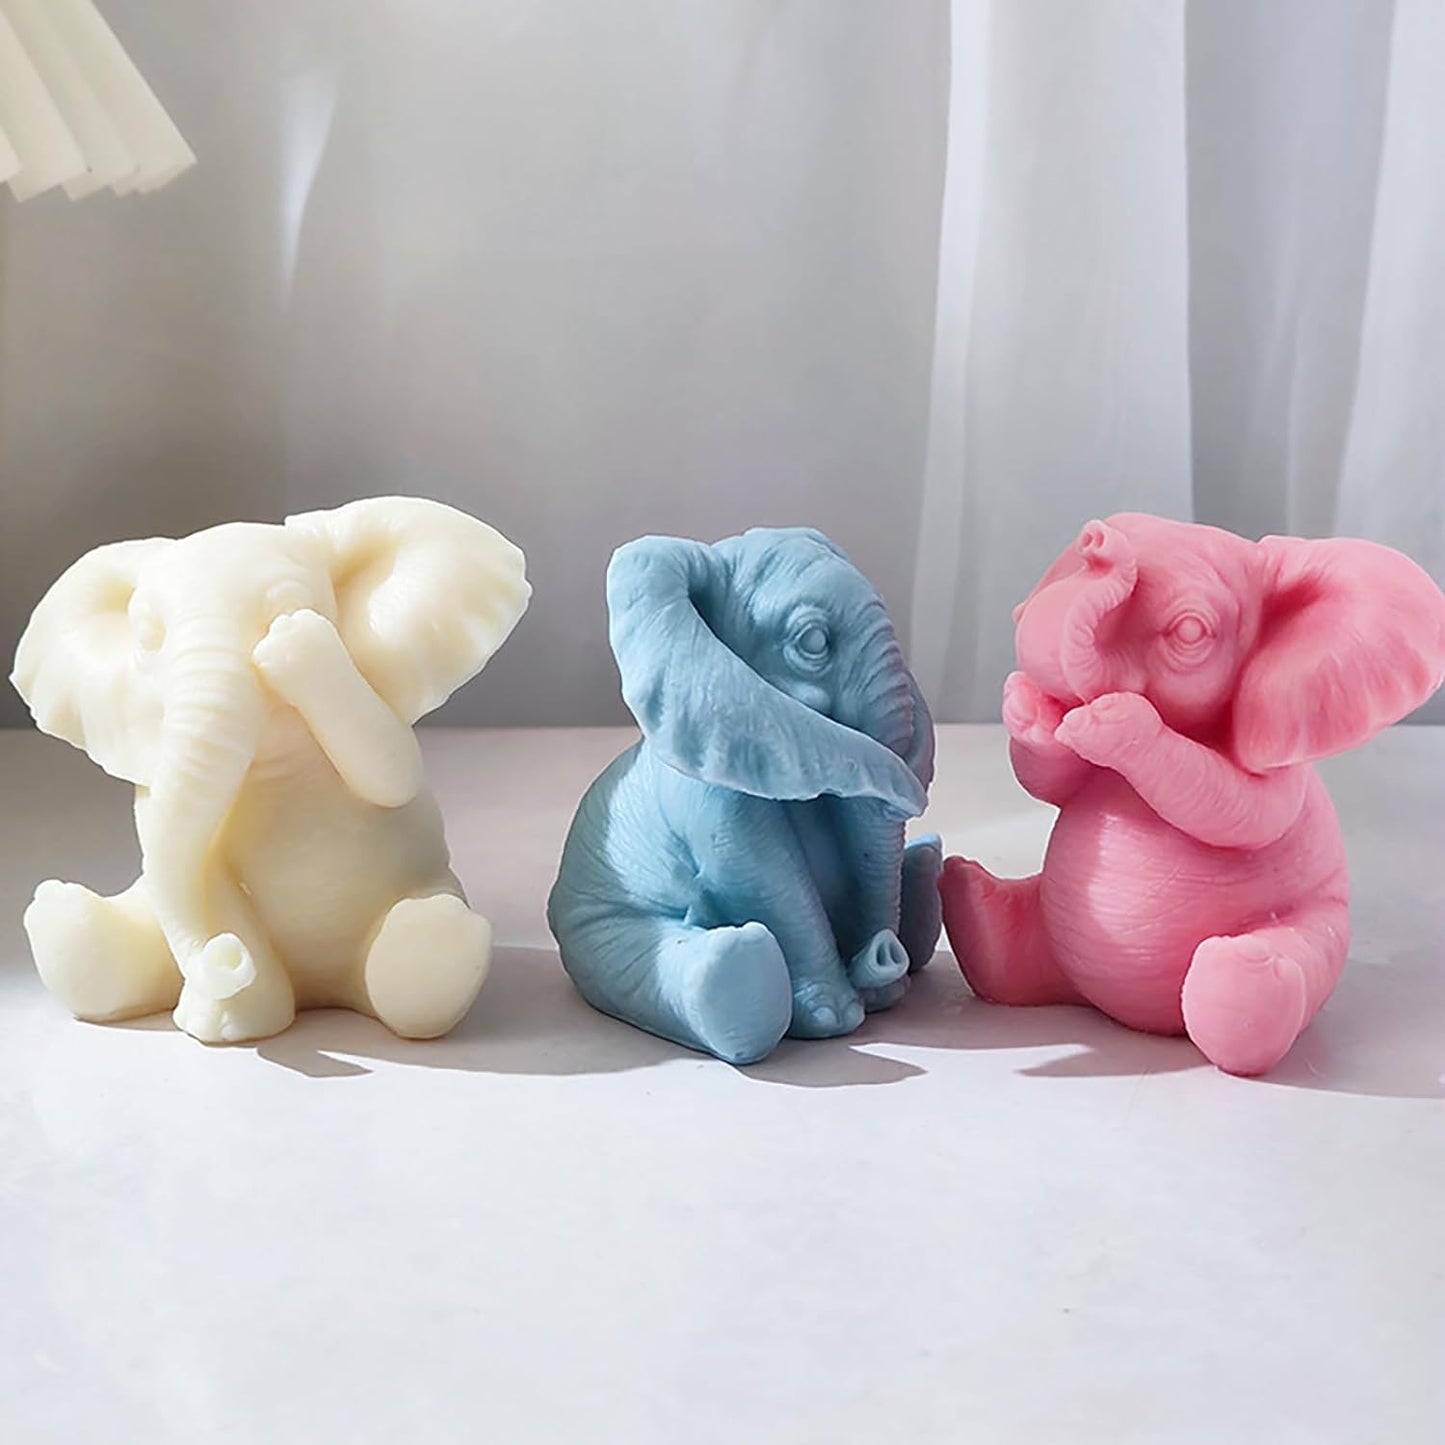 Elephant Mold Elephant Candle Mold Animal Candle Mold Elephant Resin Casting Mold Resin Making Molds Silicone Mold for Candle Home Decorate Mold Candle Making Mold 3D Animal Mold